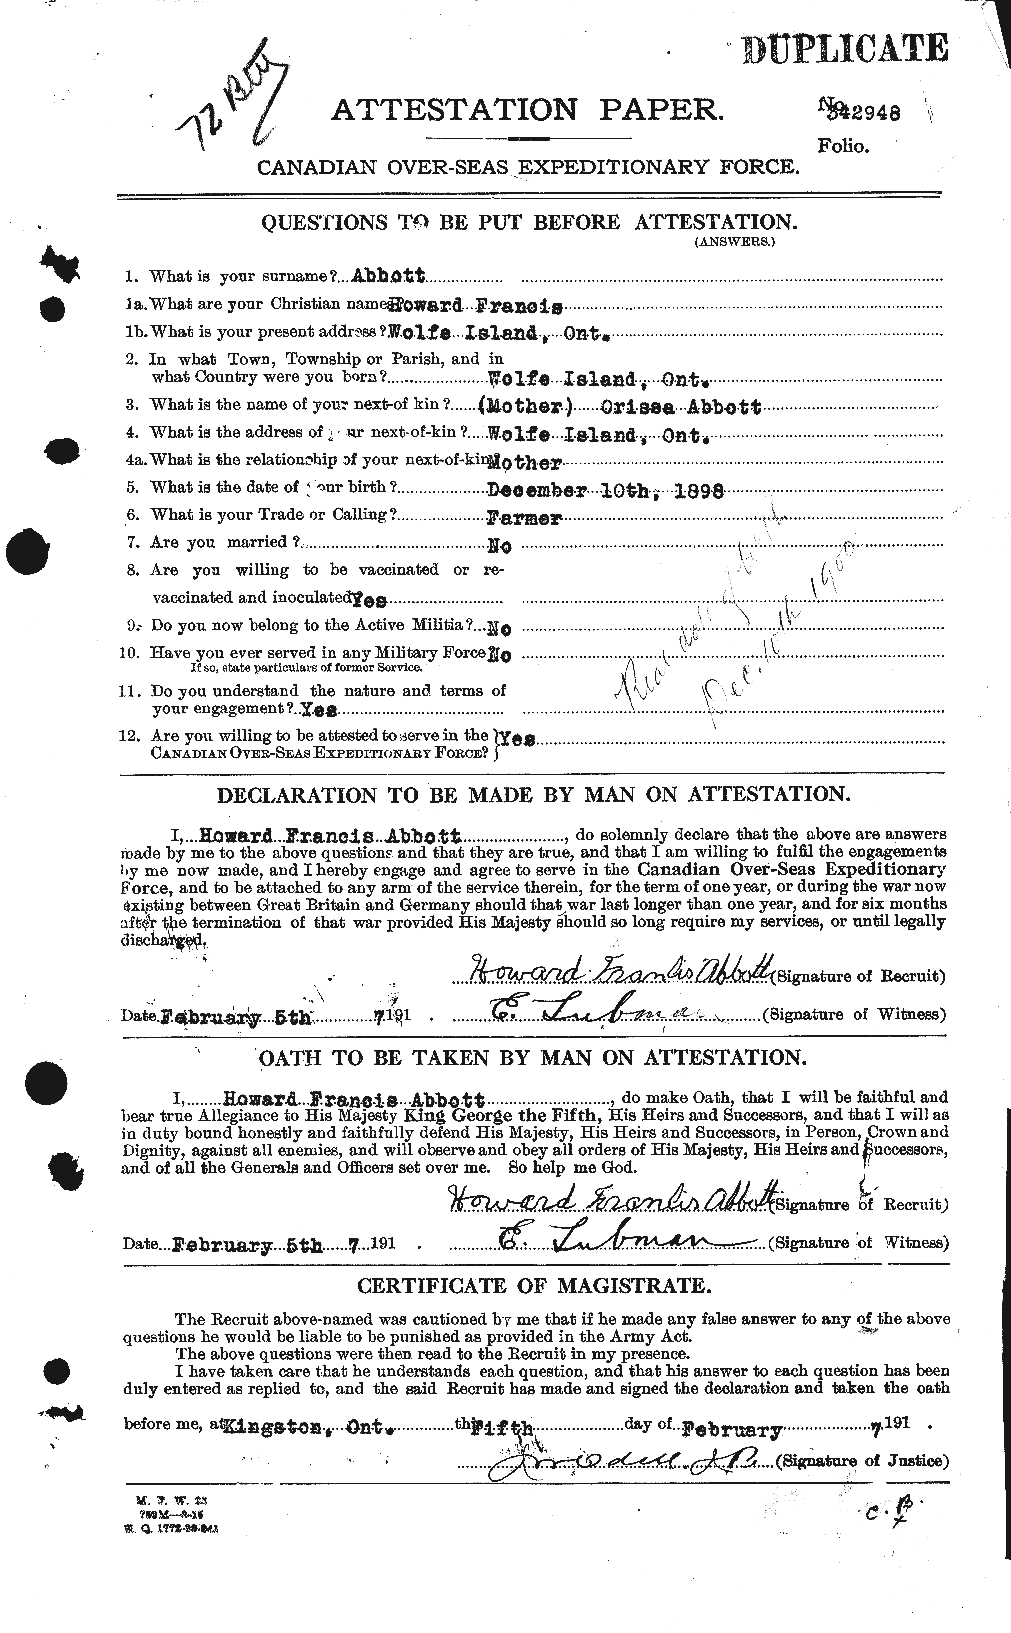 Personnel Records of the First World War - CEF 200971a